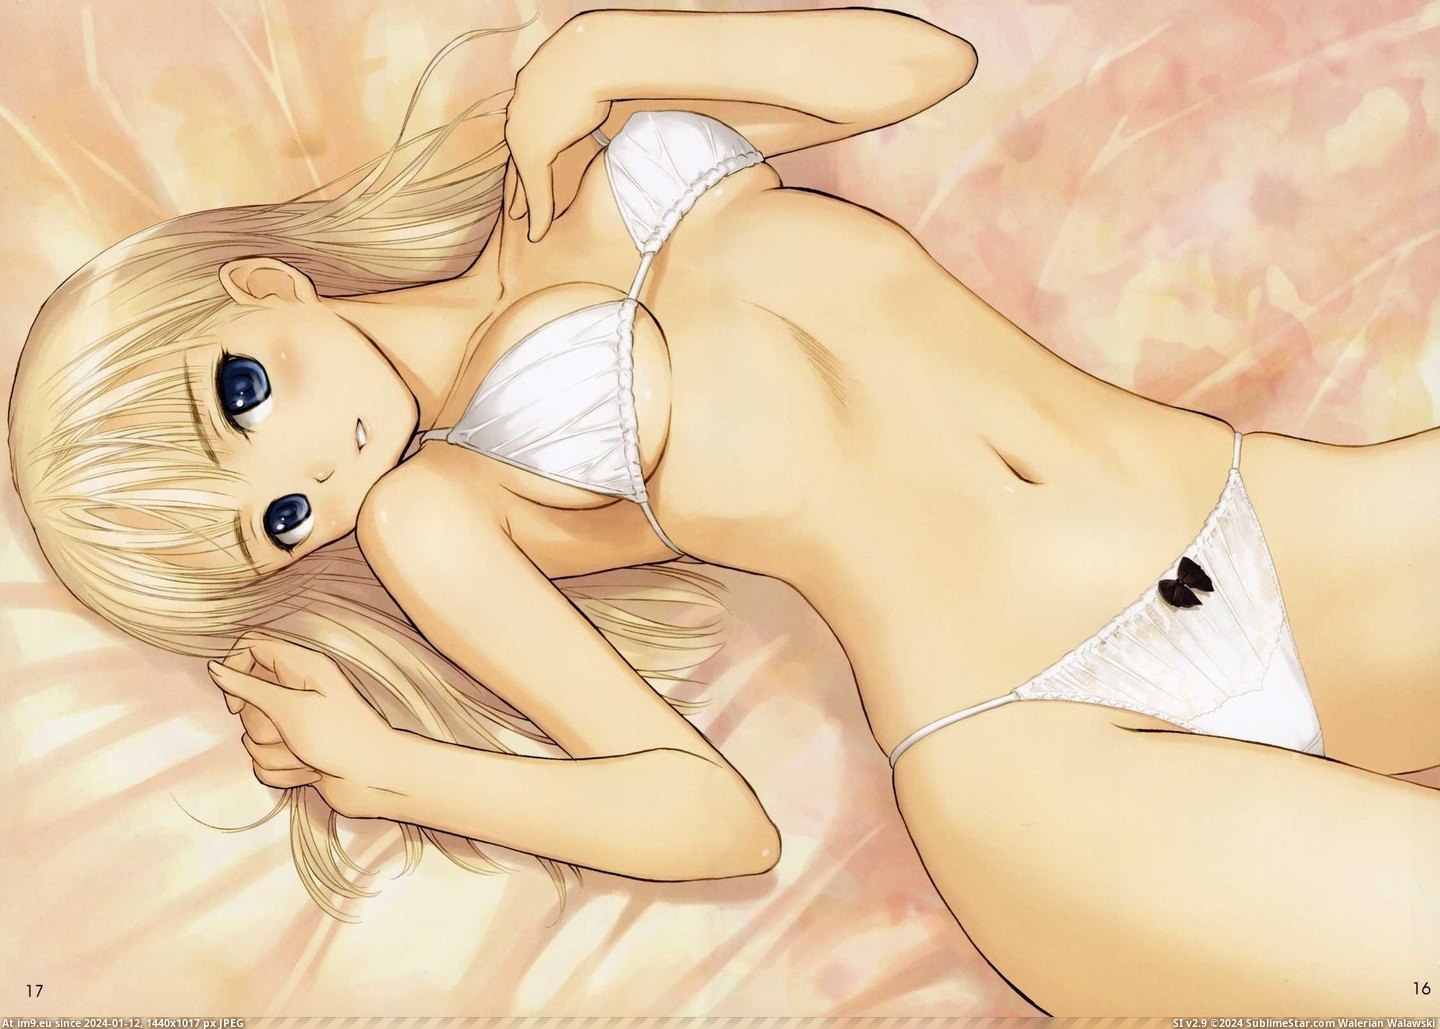 #Sexy #Anime #Wallpapers #Girls 15 Best Sexy Anime Girls Hd Wallpapers 2560 X 1600 (anime image) Pic. (Obraz z album Anime wallpapers and pics))